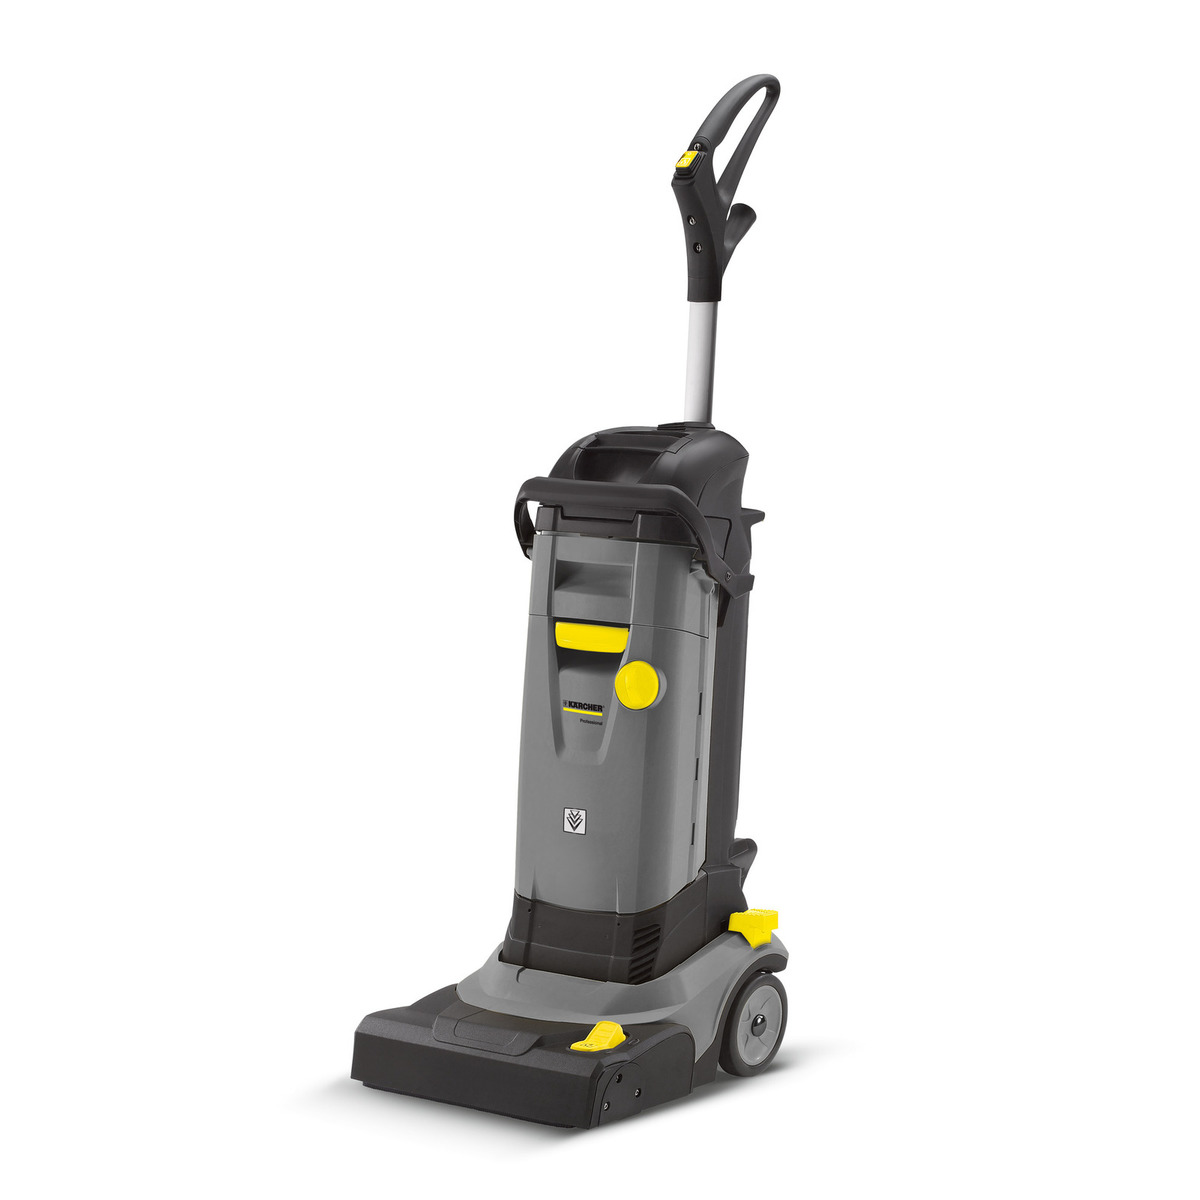 Windsor Saber Blade 12 Upright Micro-Scrubber windsor, karcher, saber, blade, 12, upright, mini, micro, scrubber, commercial, compact, auto-scrubber, automatic, clean, floor, machine, professional, 